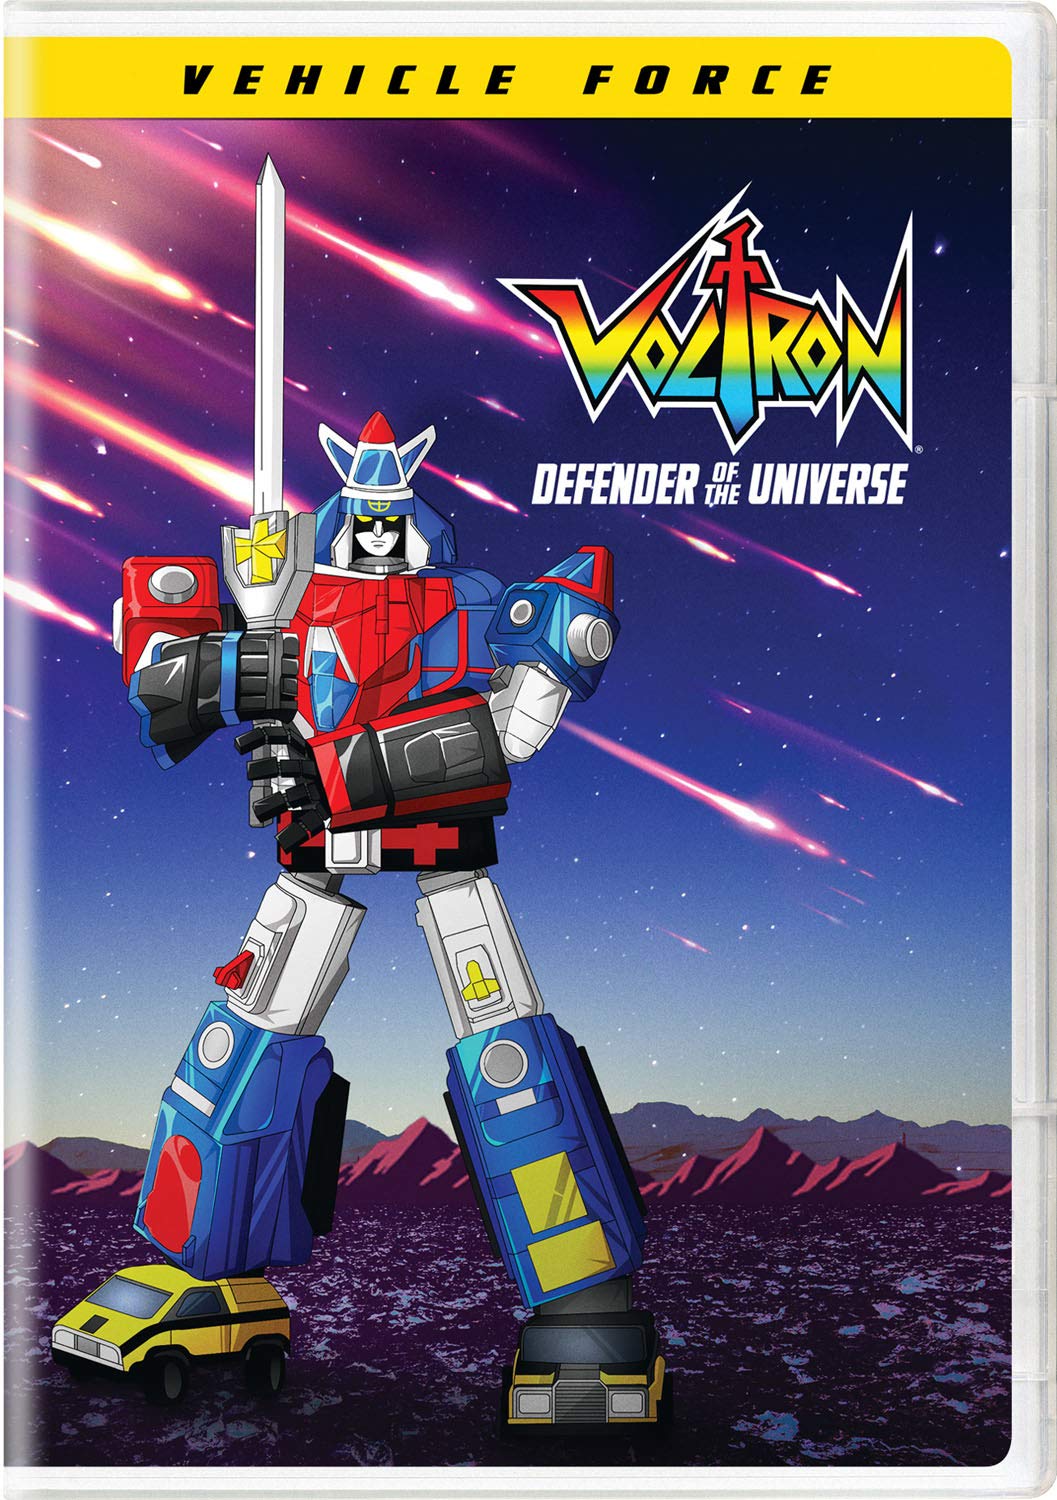 Voltron - Defender Of The Universe: Vehicle Force - DVD [ 1984 ]  - Children Movies On DVD - Movies On GRUV